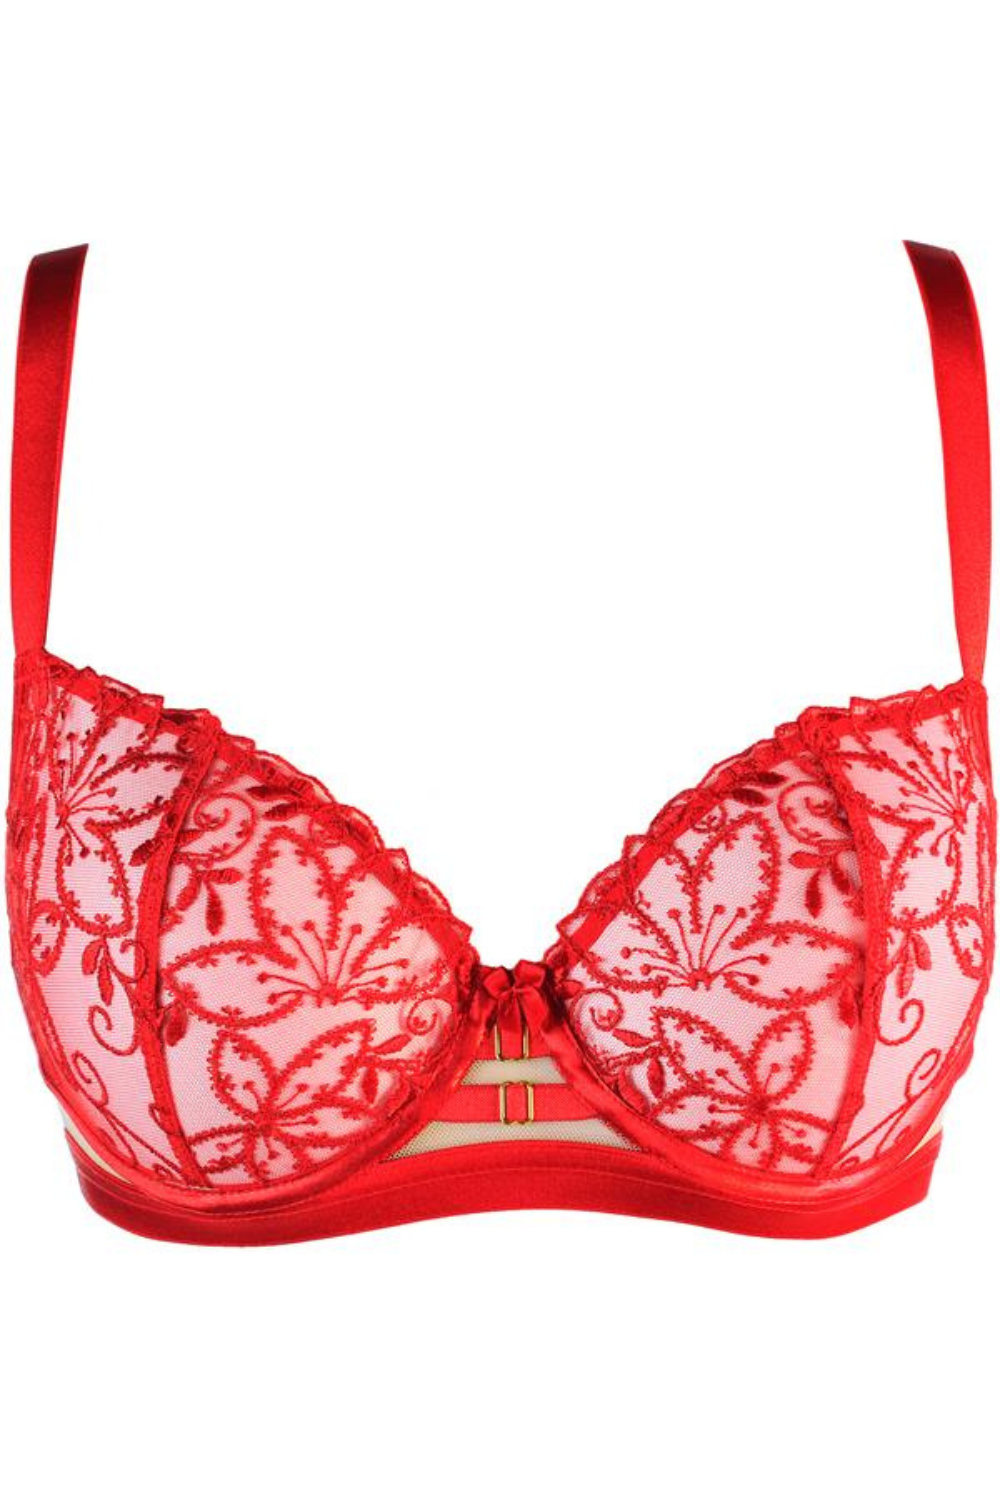 Ayana Floral Embroidered Balconette Bra - Red